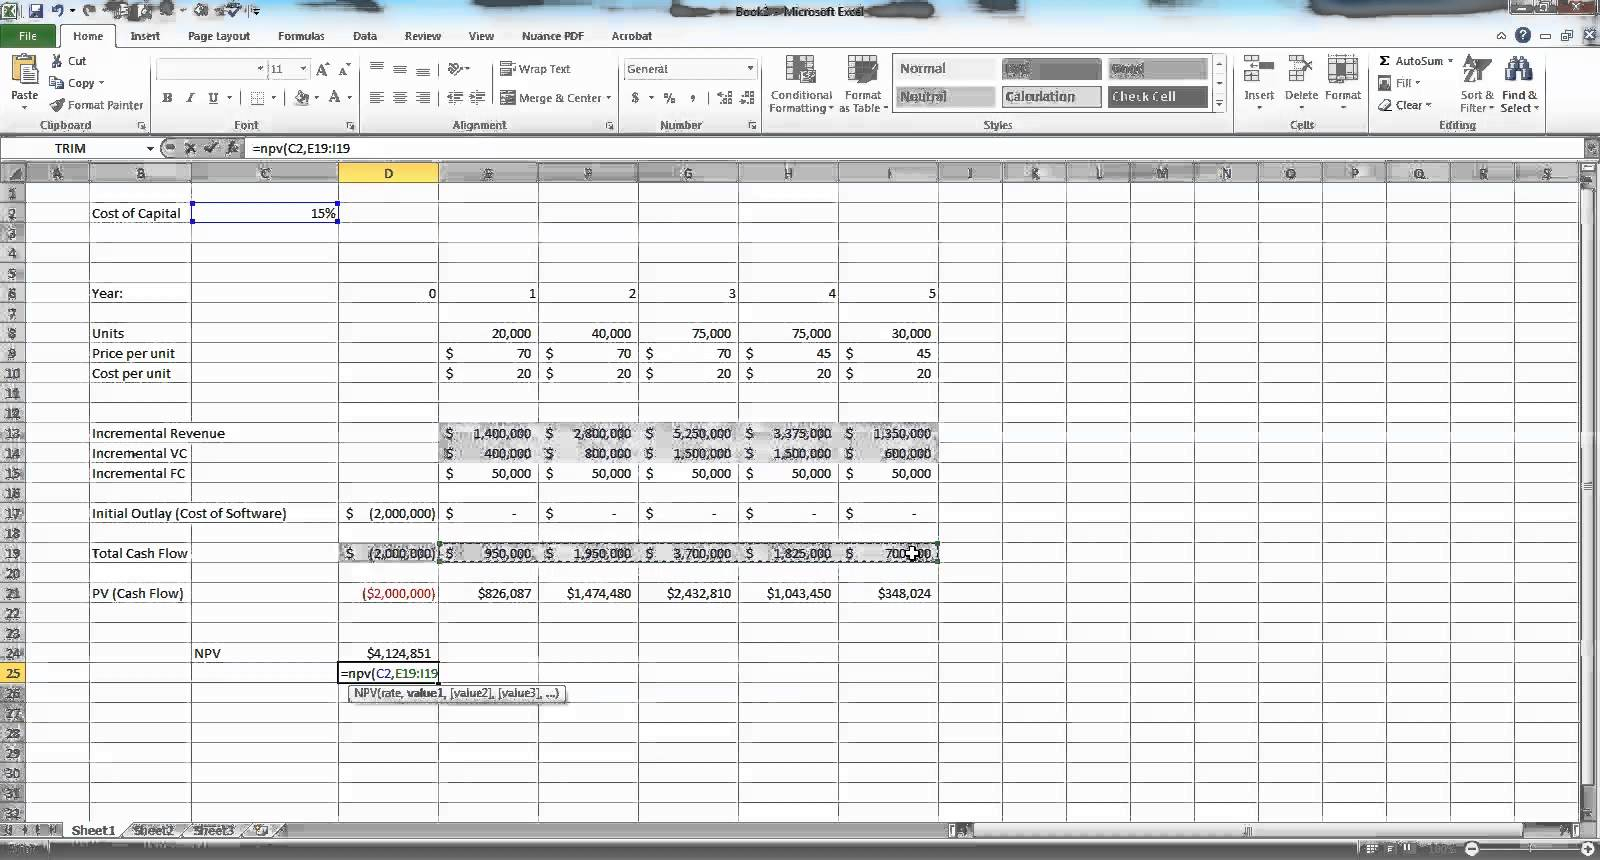 Budget Spreadsheet Examples Throughout Samples Of Budget Spreadsheets Or Sample Spreadsheet For Wedding